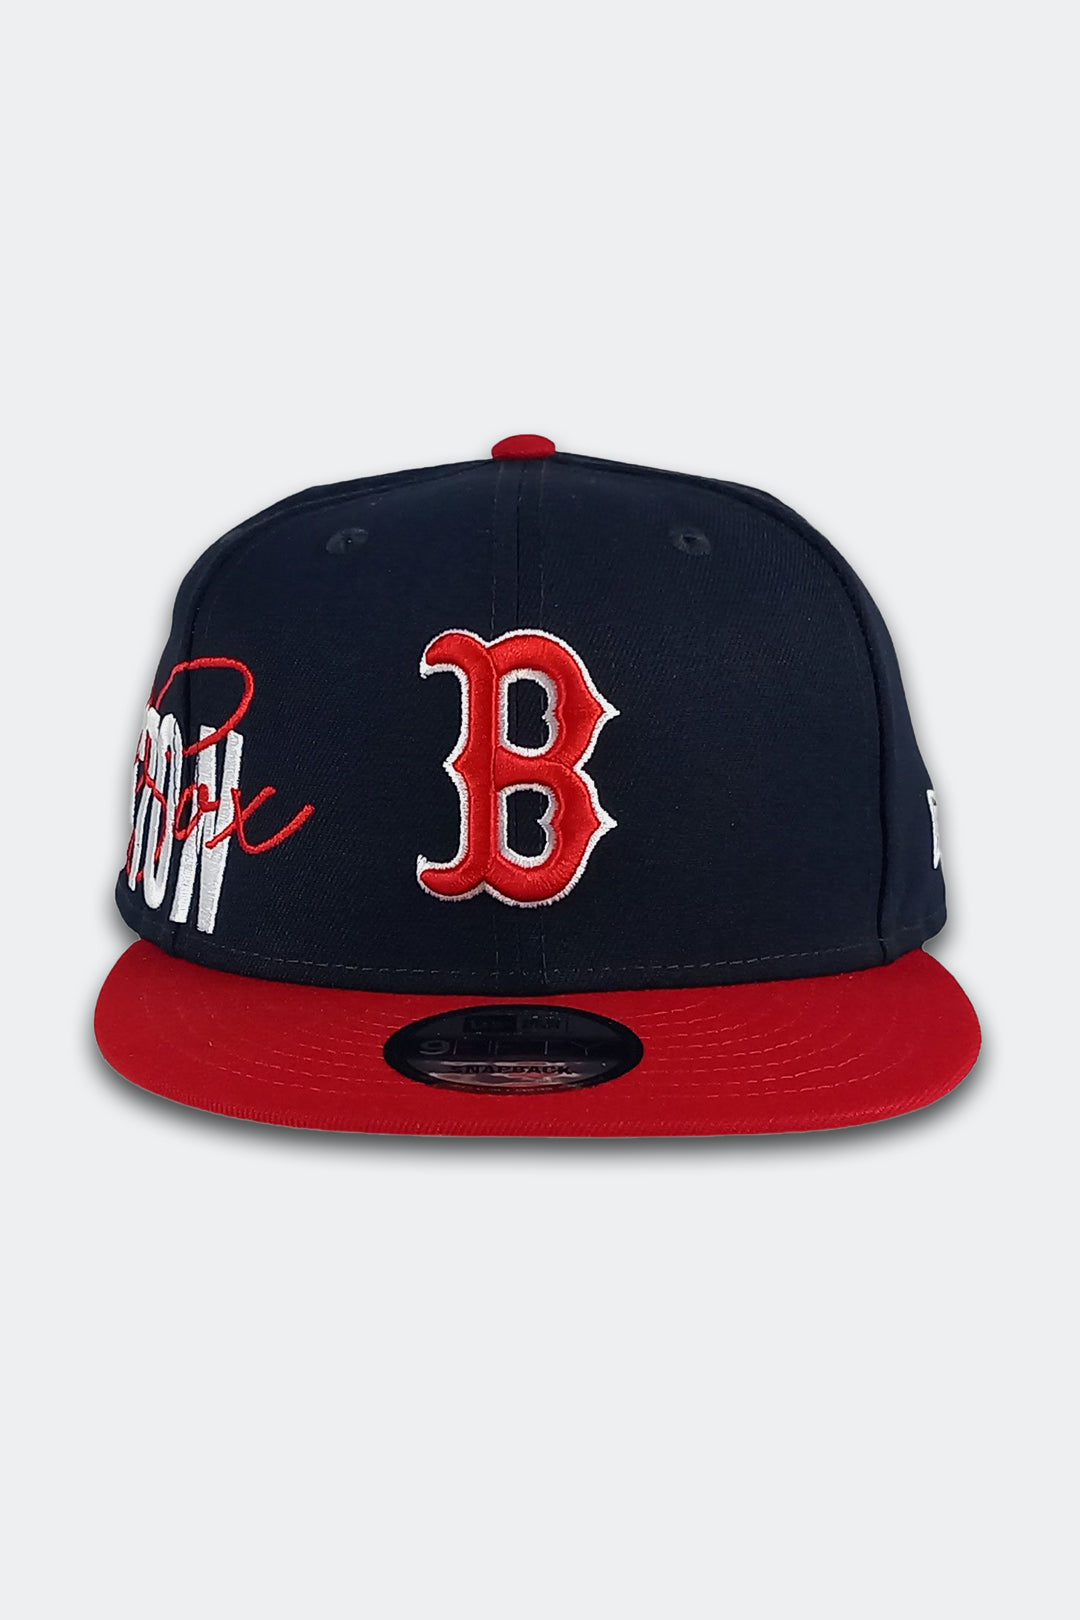 NEW ERA 9FIFTY BOSTON RED SOX "SIDE FONT" - HYPE